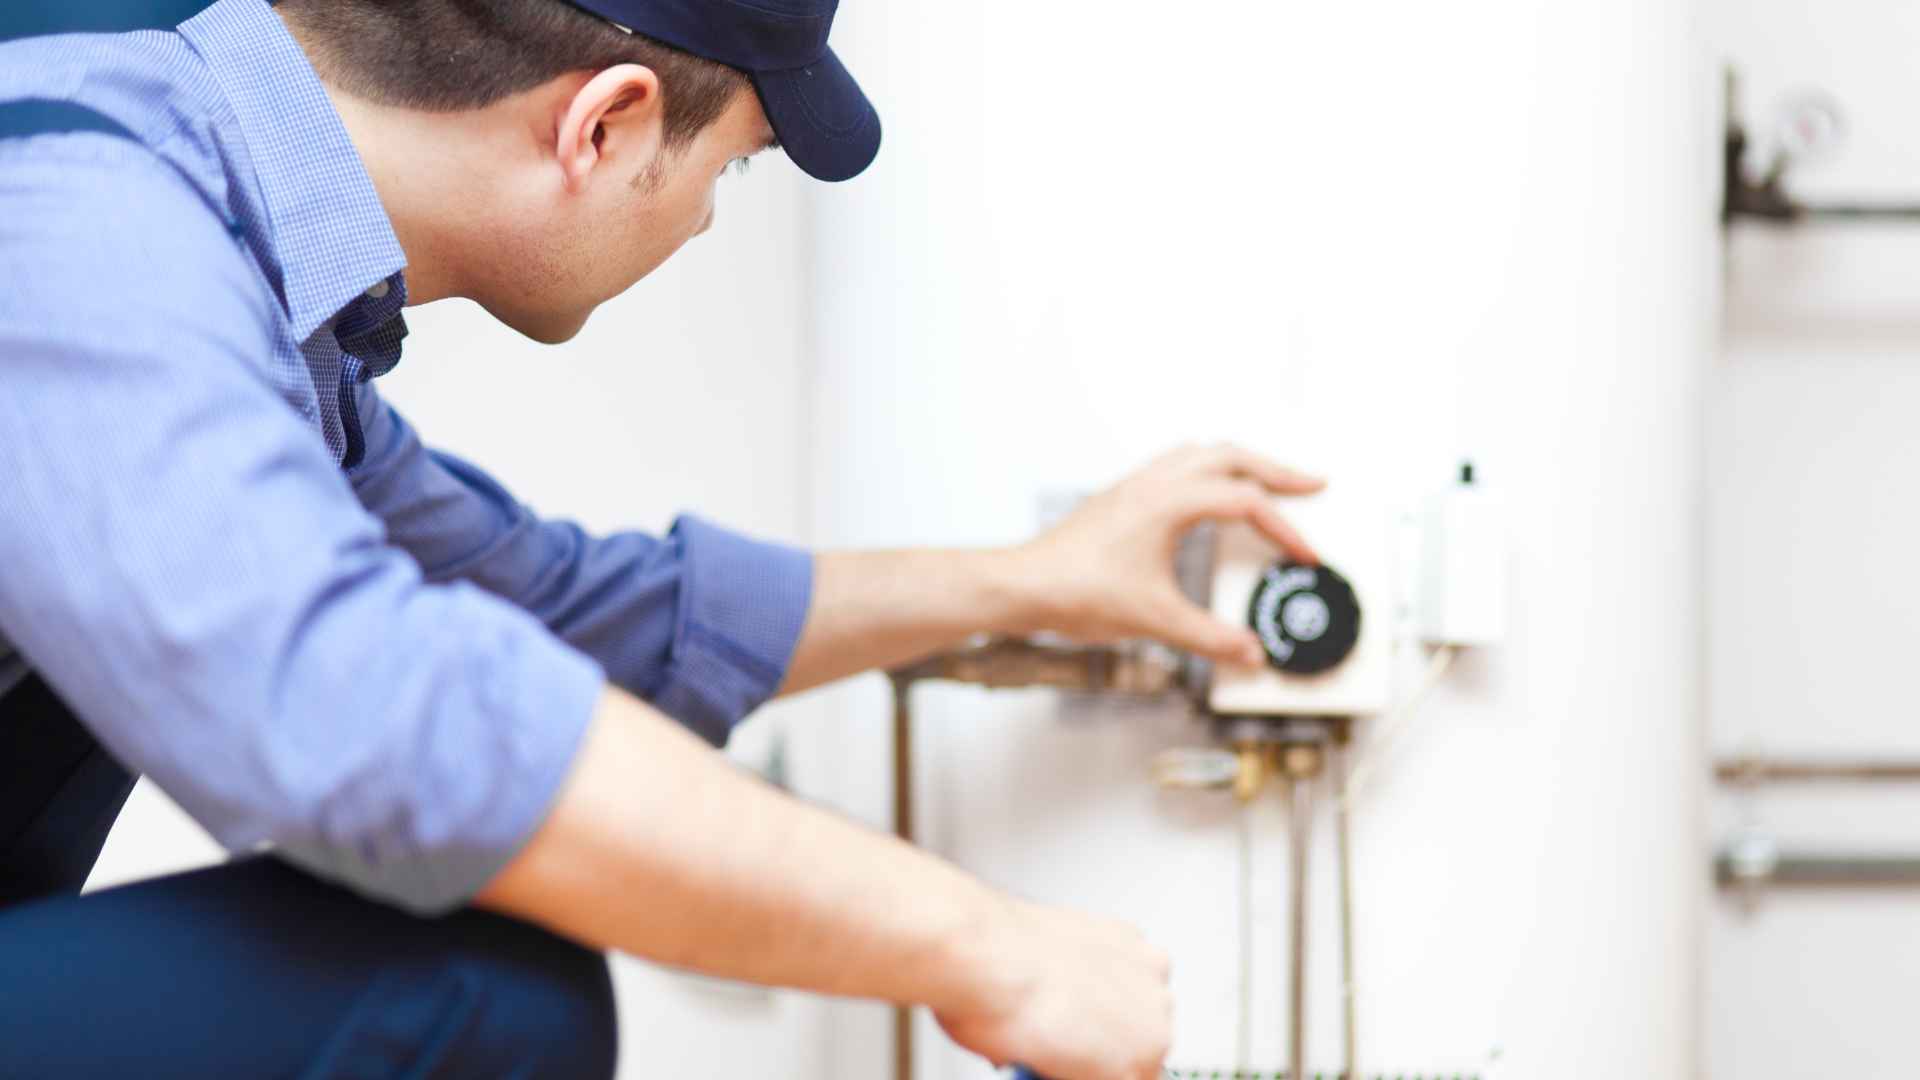 A technician adjusting the thermostat on a residential water heater system.